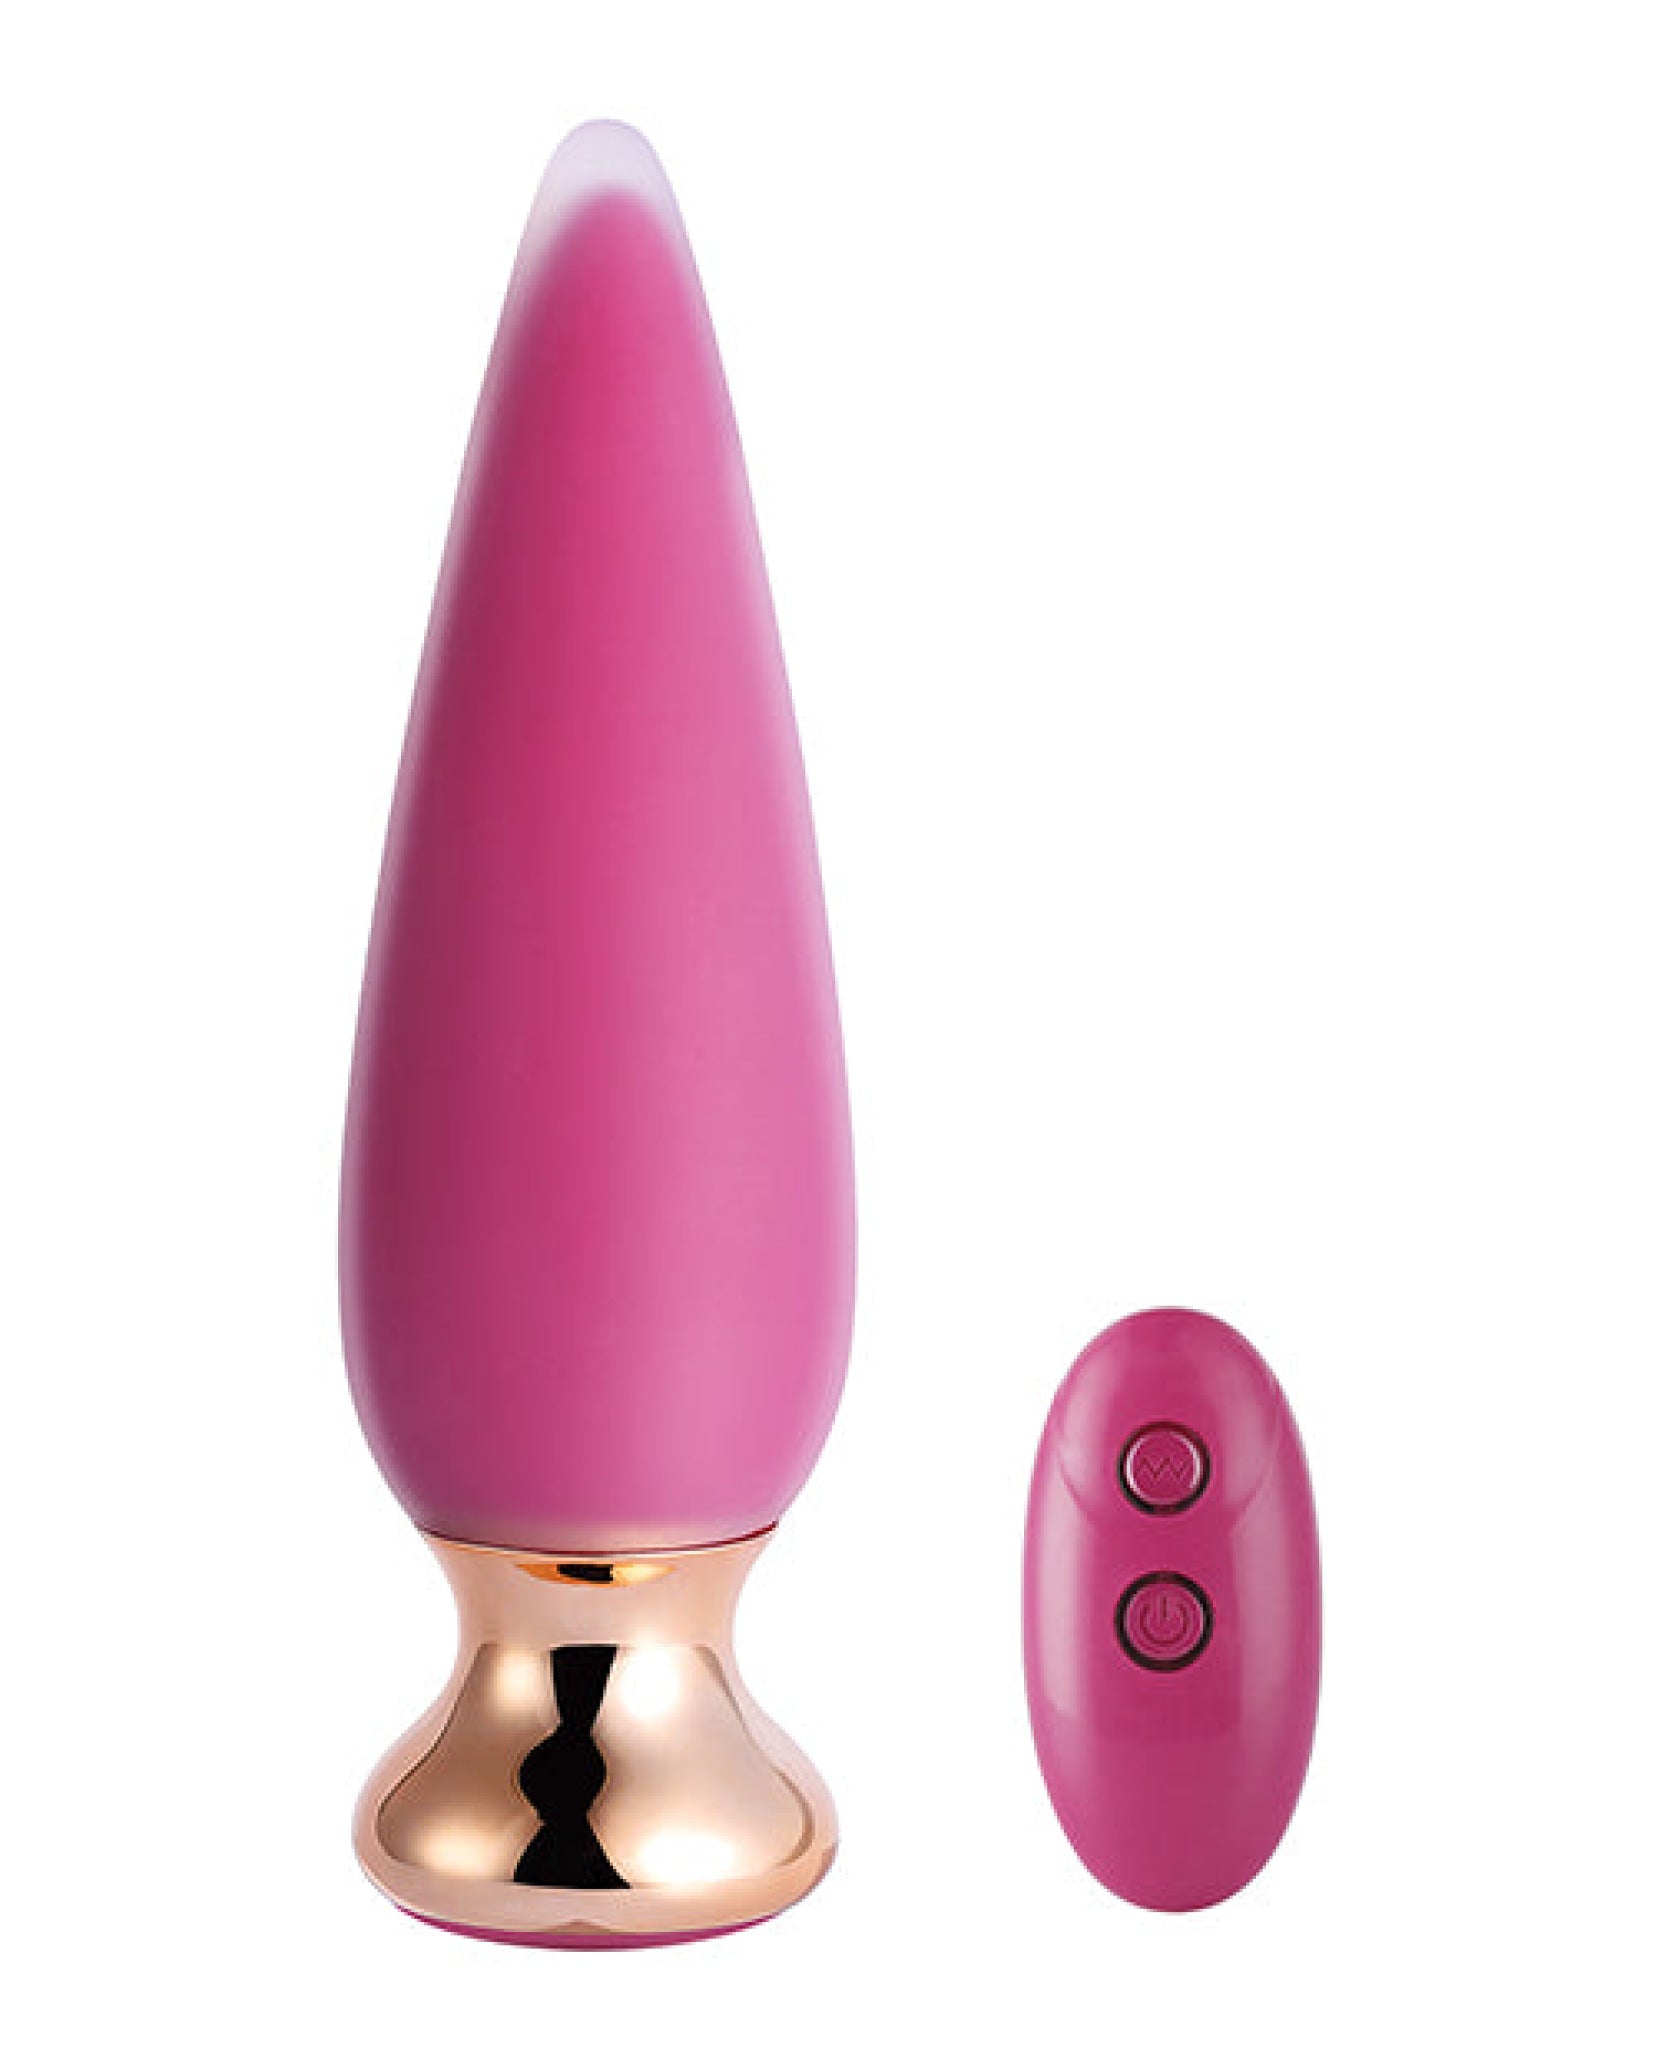 Doro Plus Vibrating Anal Plug With Remote Control - Pink Uc Global Trade